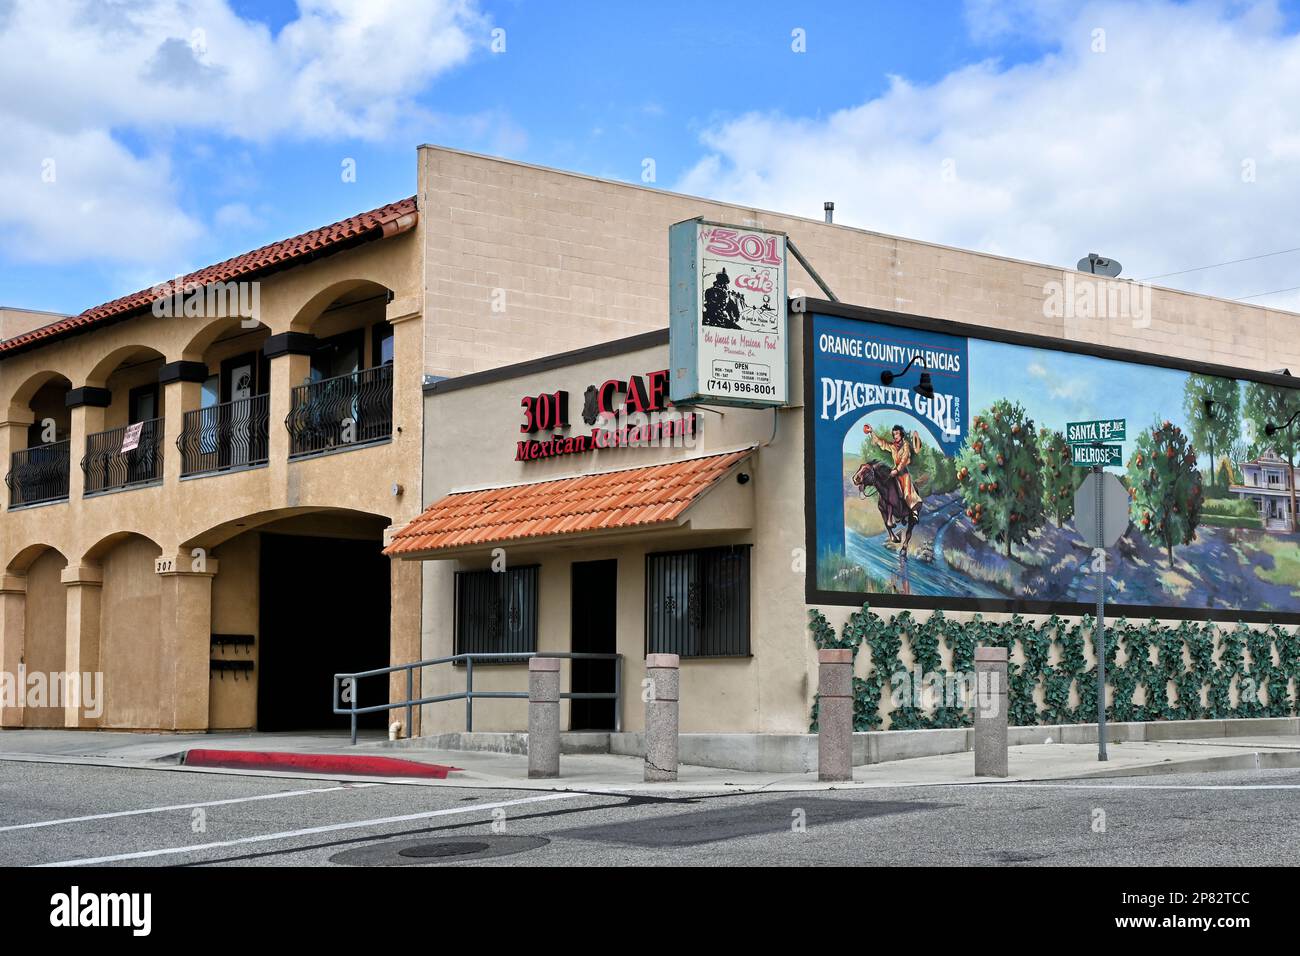 PLACENTIA, CALIFORNIA - 8 MAR 2023: The 301 Cafe in Old Town Placentia Foto Stock